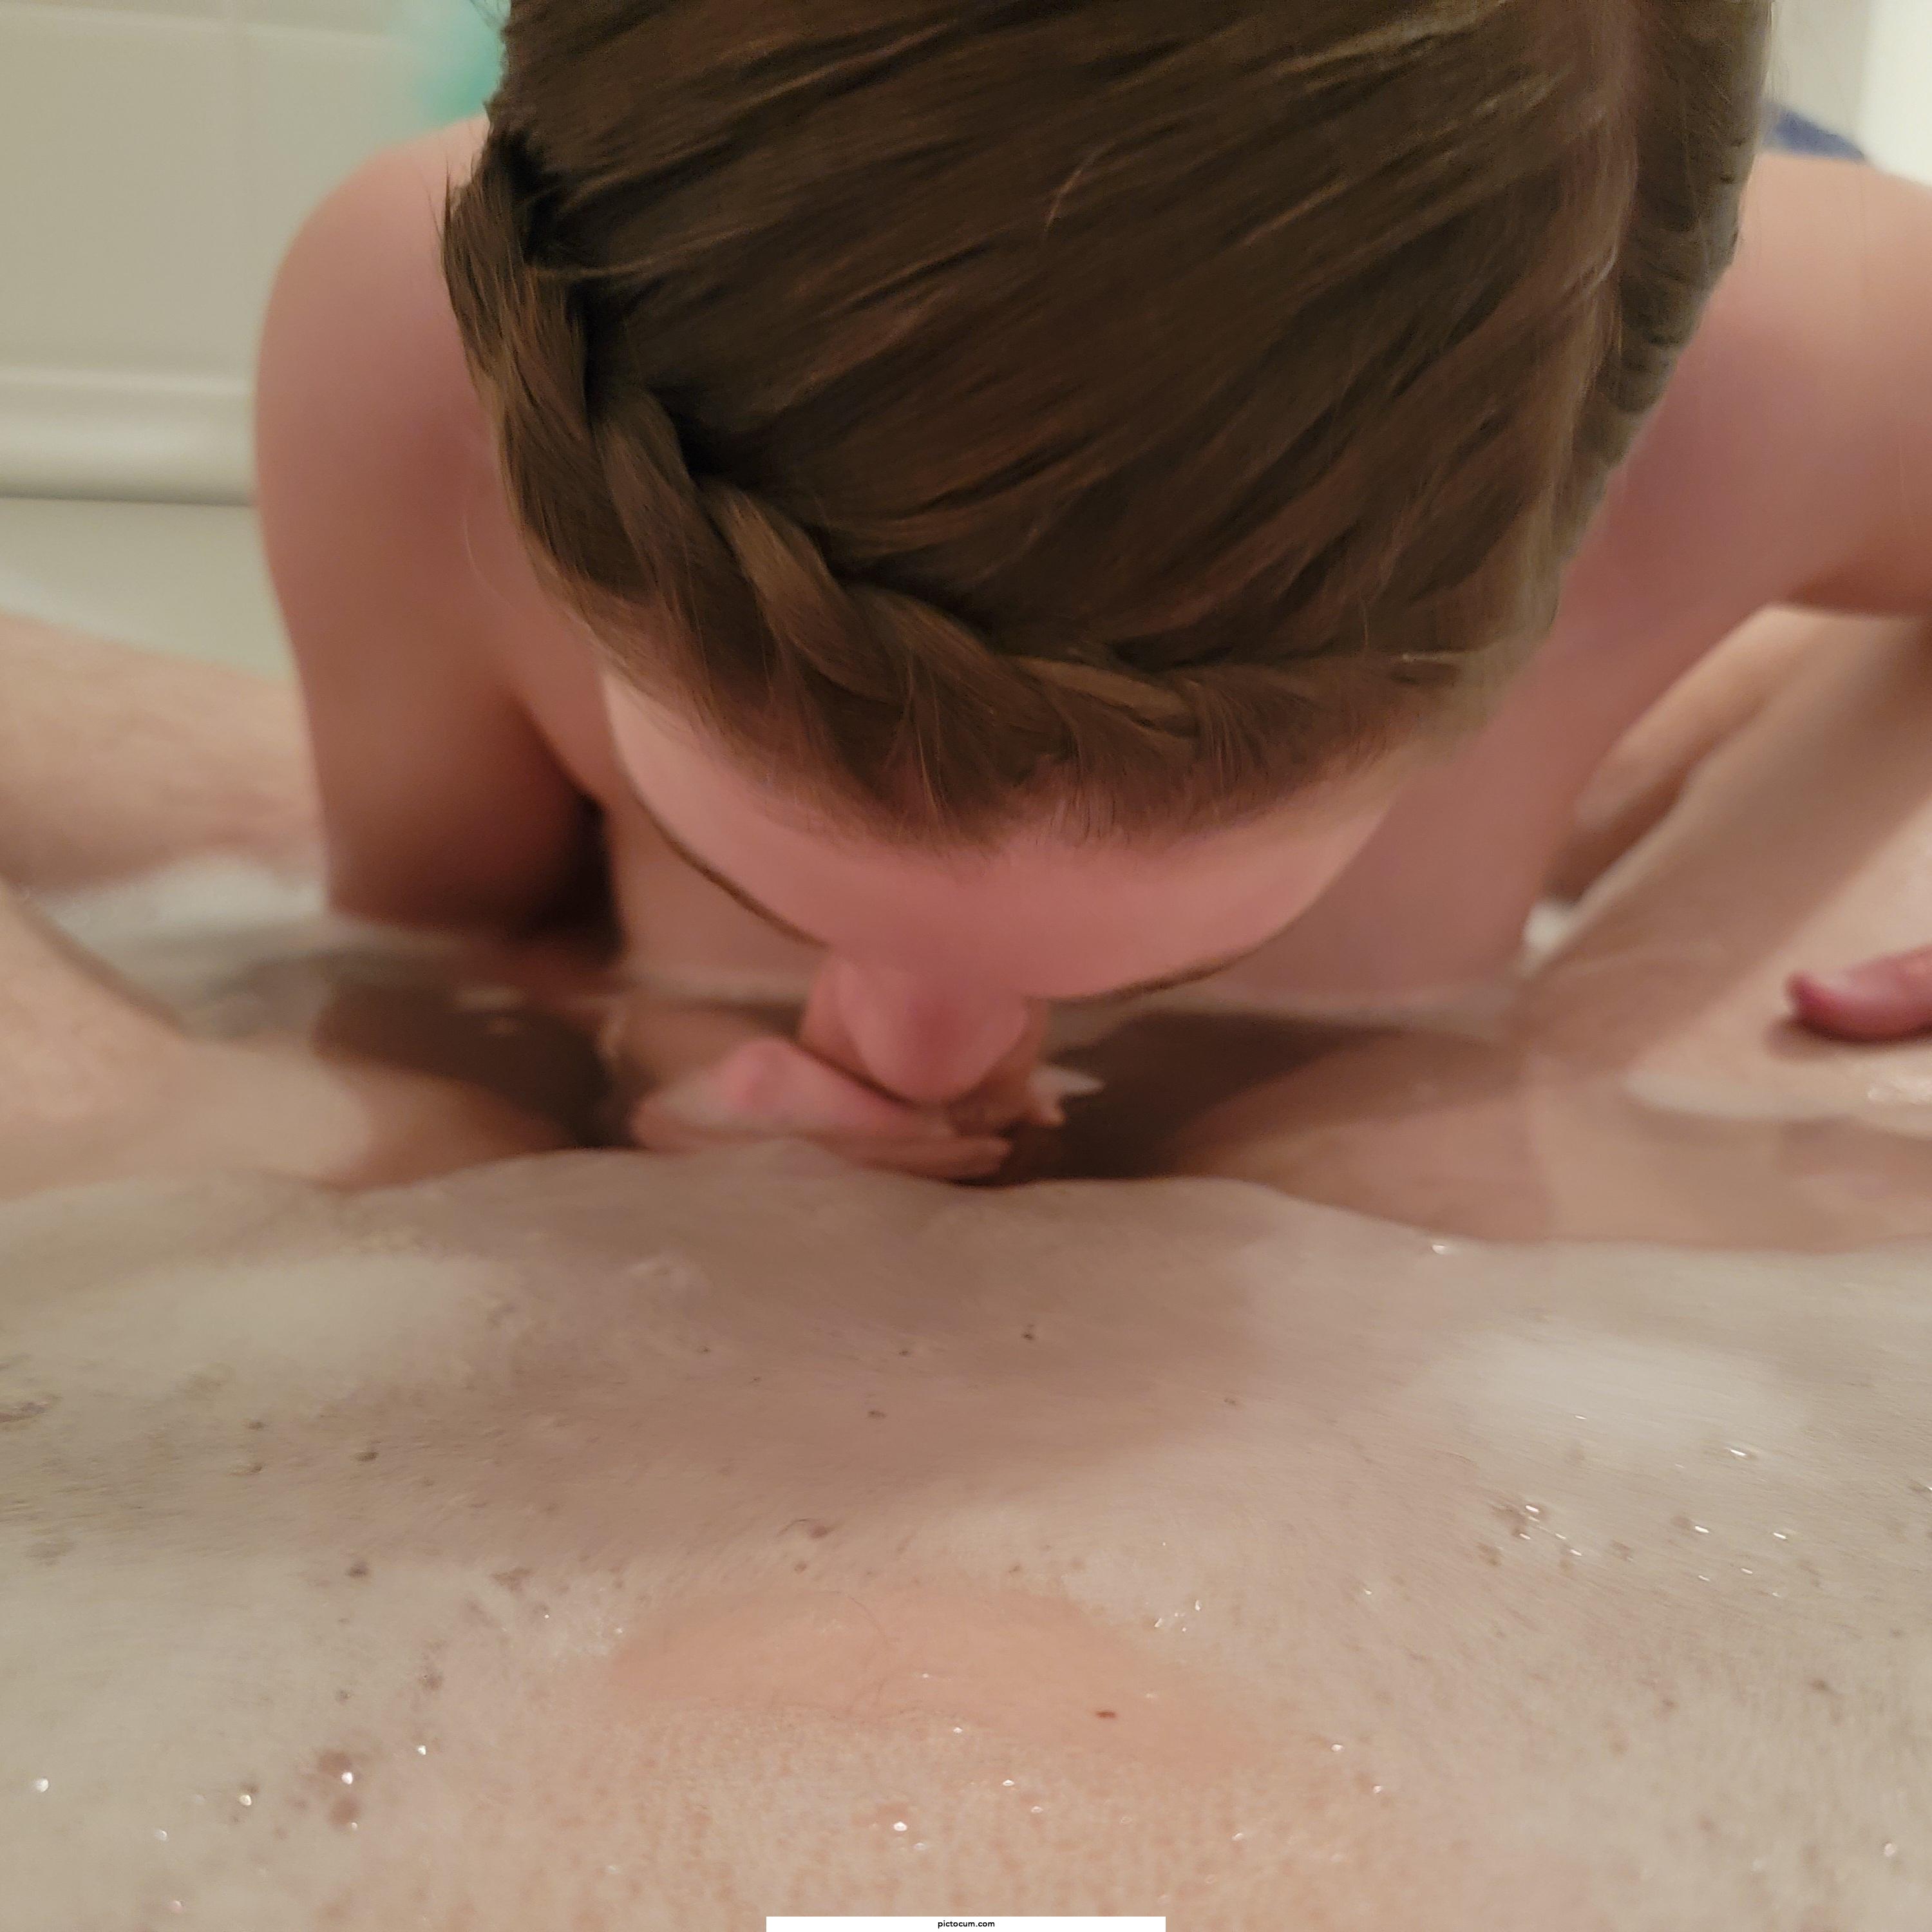 Sucking dick in the tub is one of my favorite pastimes🤤🥵